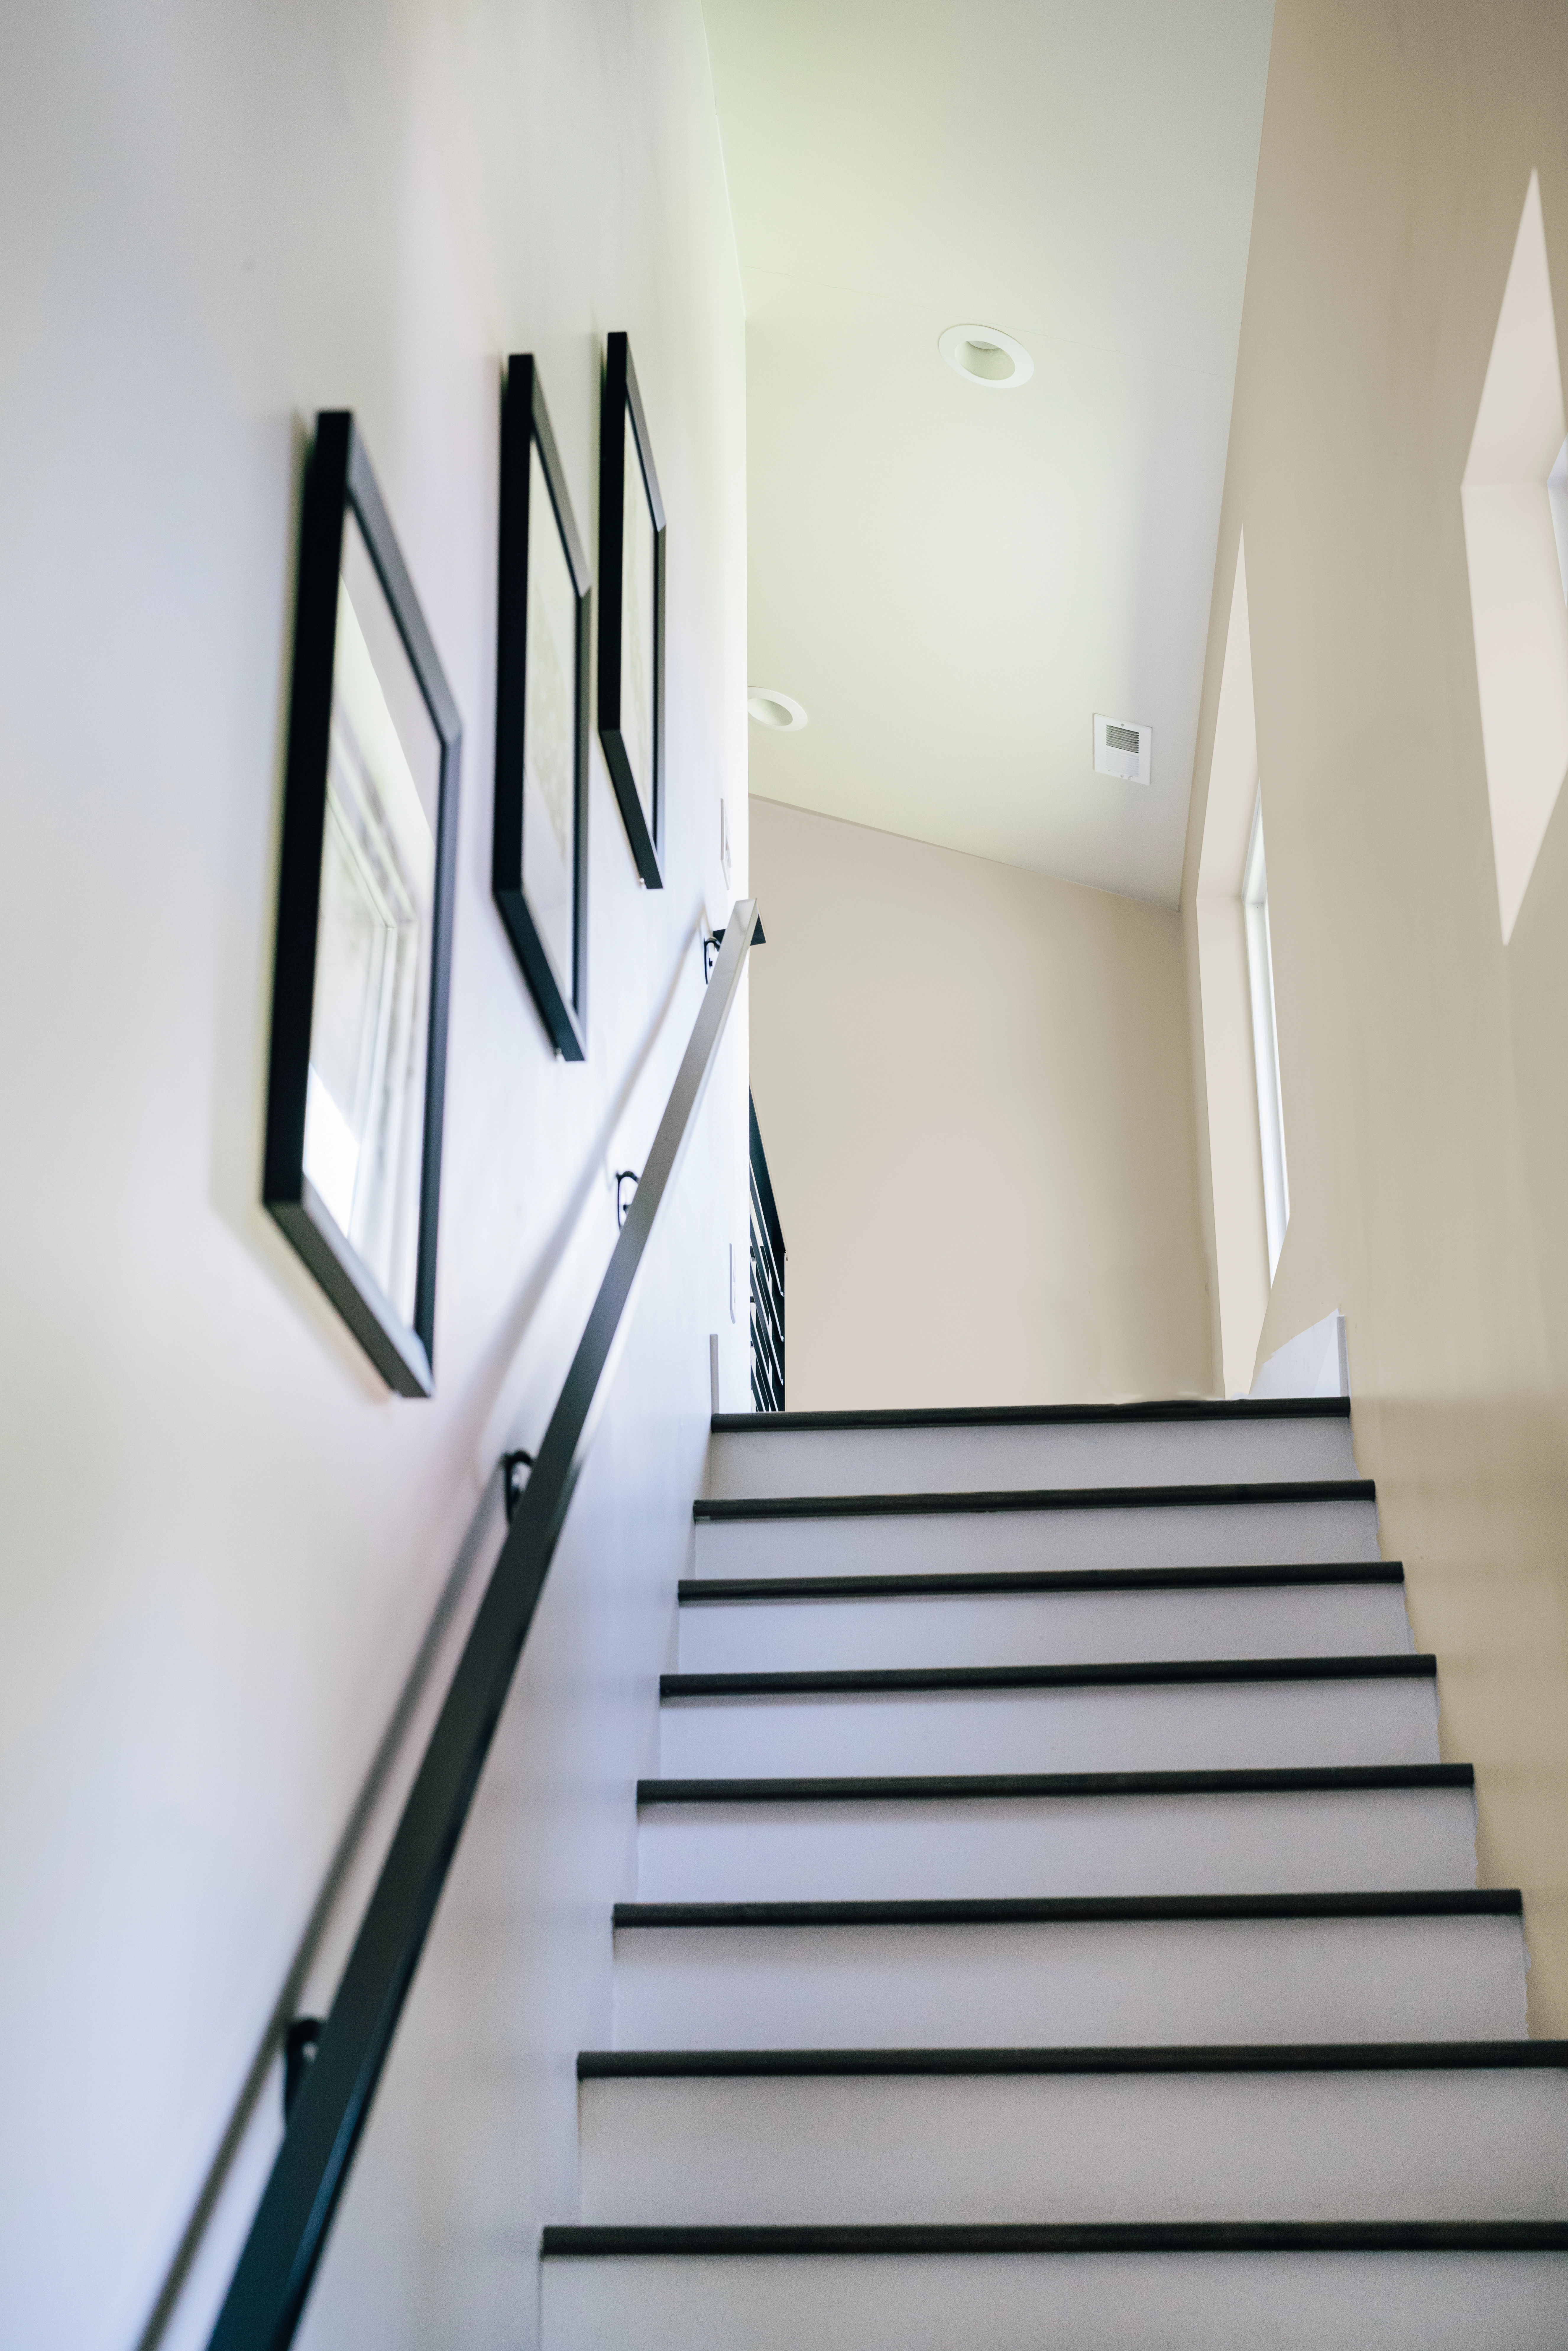 Angled view in stairway with white painted steps, black trim and railing, and beige walls.